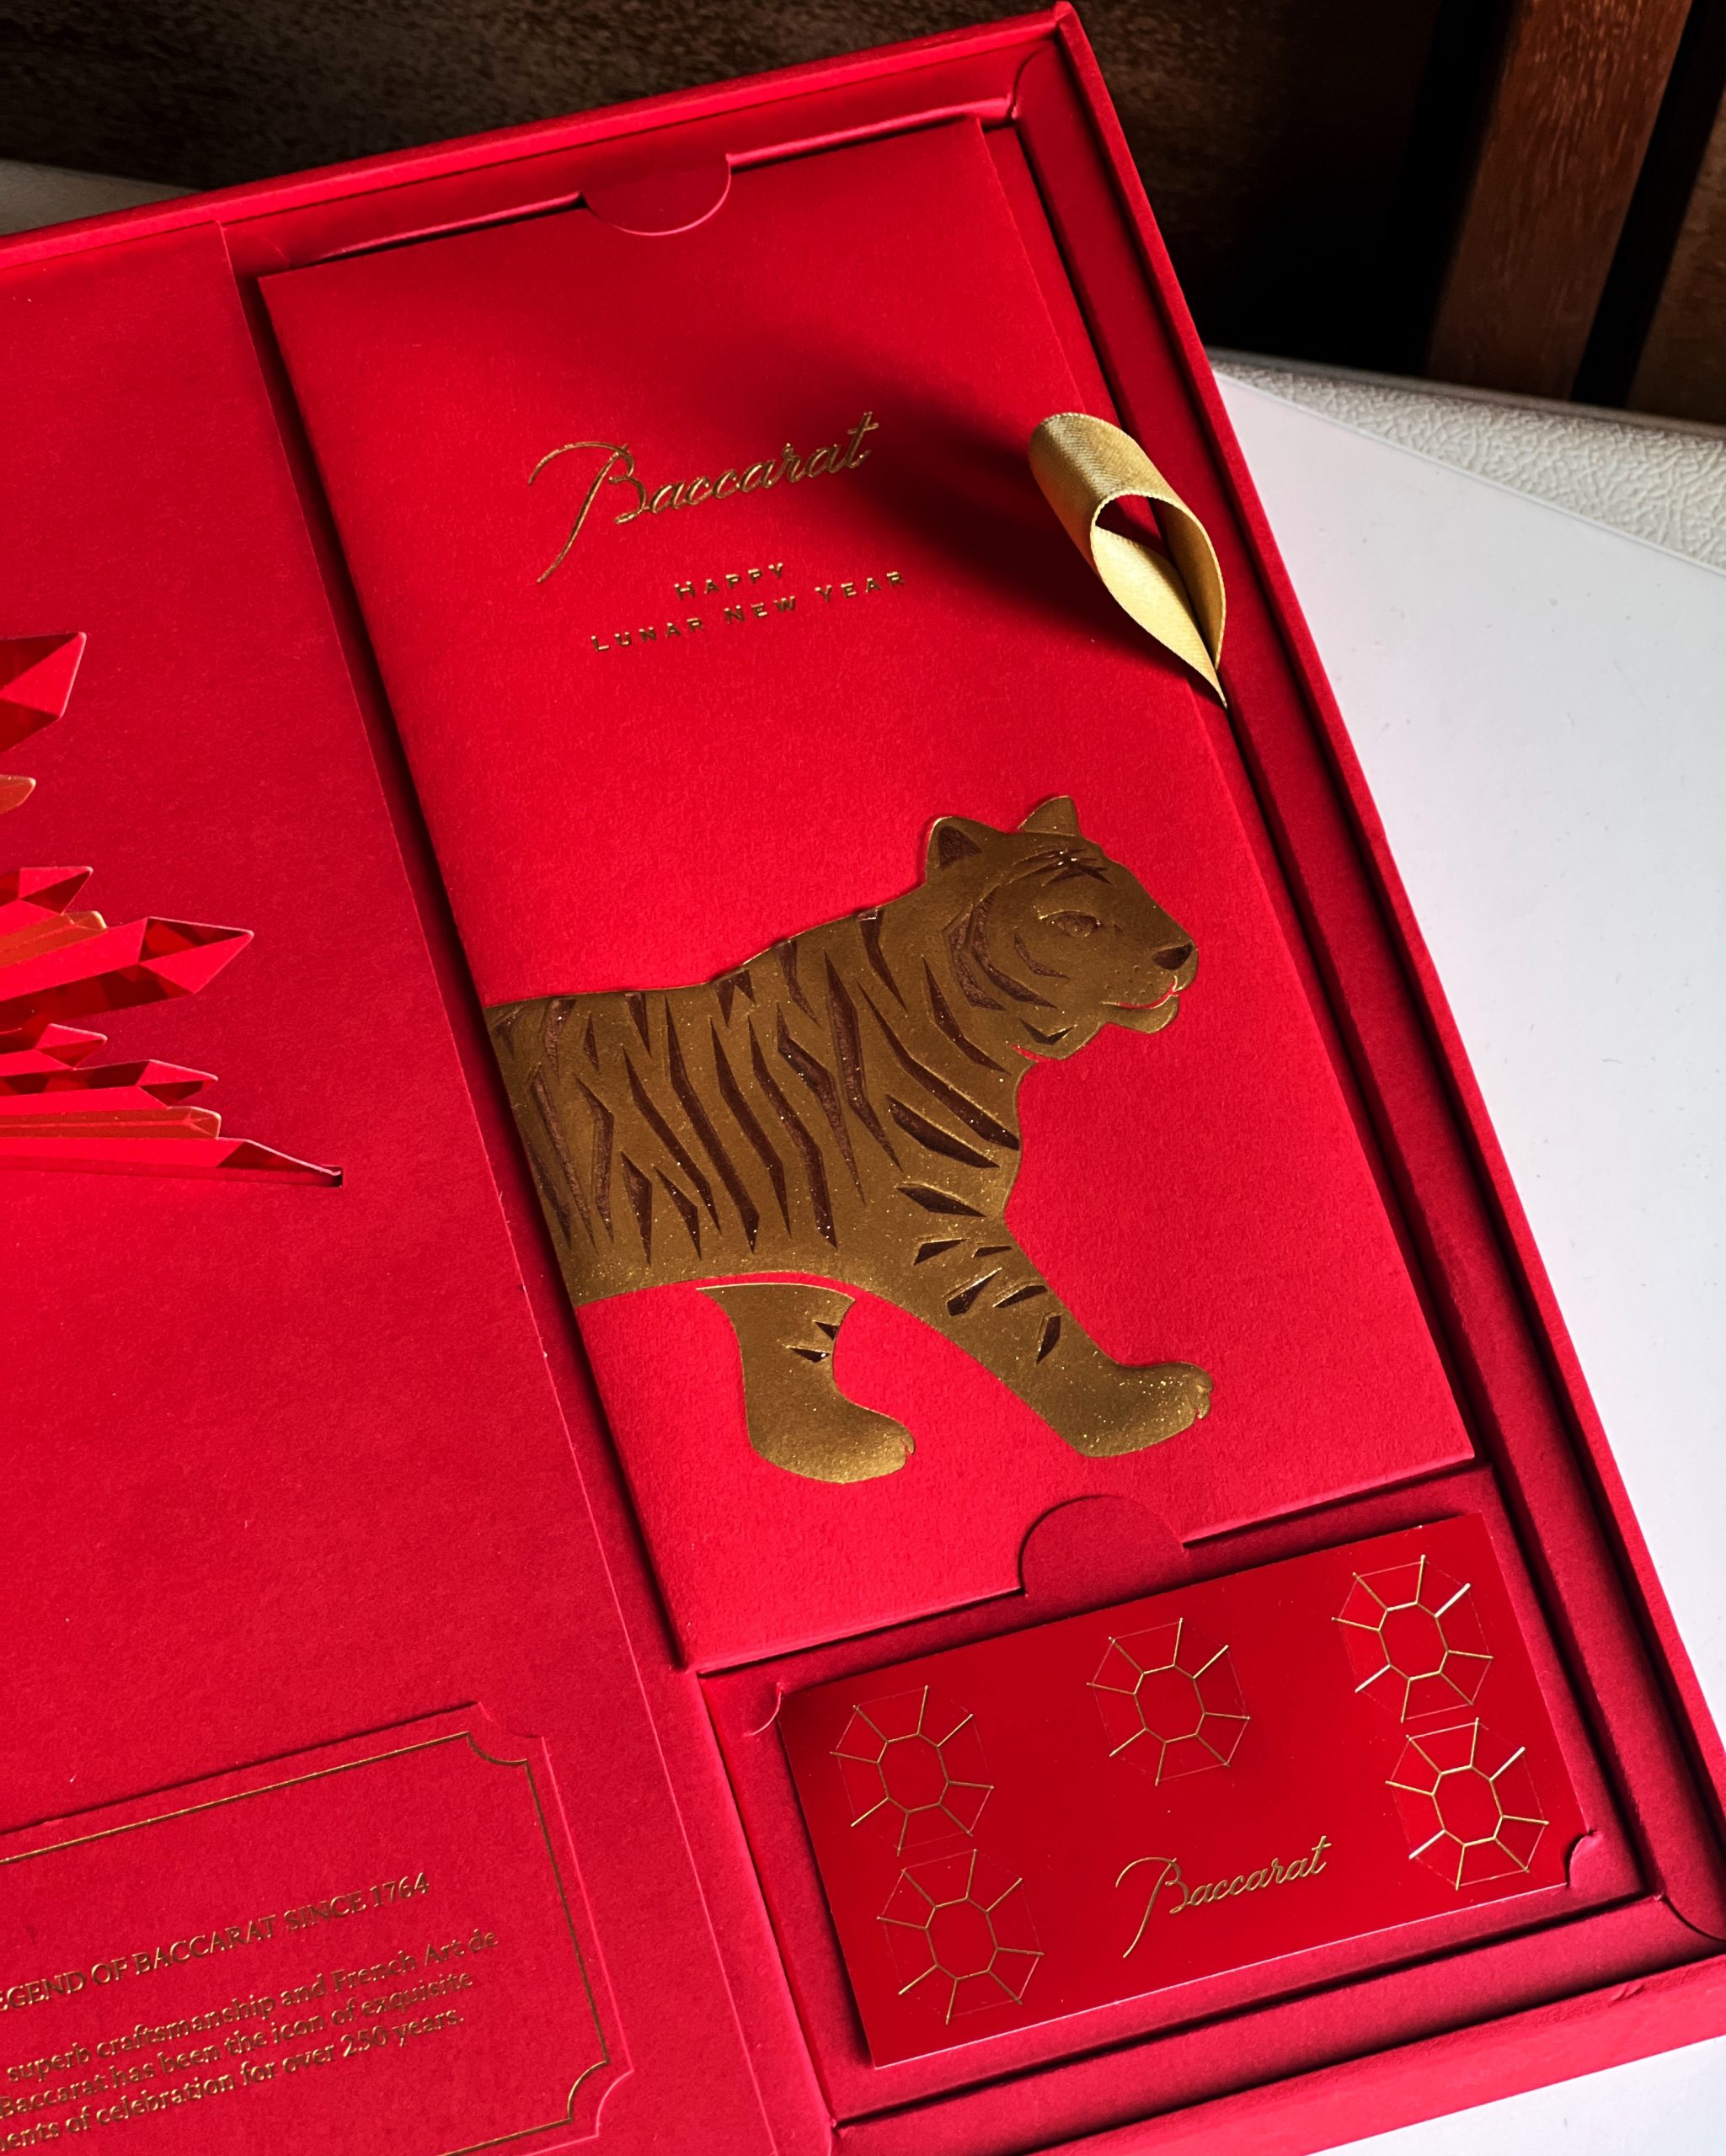 Eco Art Limited on X: Eco Art Red Packet can provide the die-cut design  for the corporate clients. #ashurst #ashursthk #CNY #chinesenewyear  #newyear #redpacket #redpocket #angpow #laisee #redpacket2018  #redpacketgift #hkgift #gifthk #design #